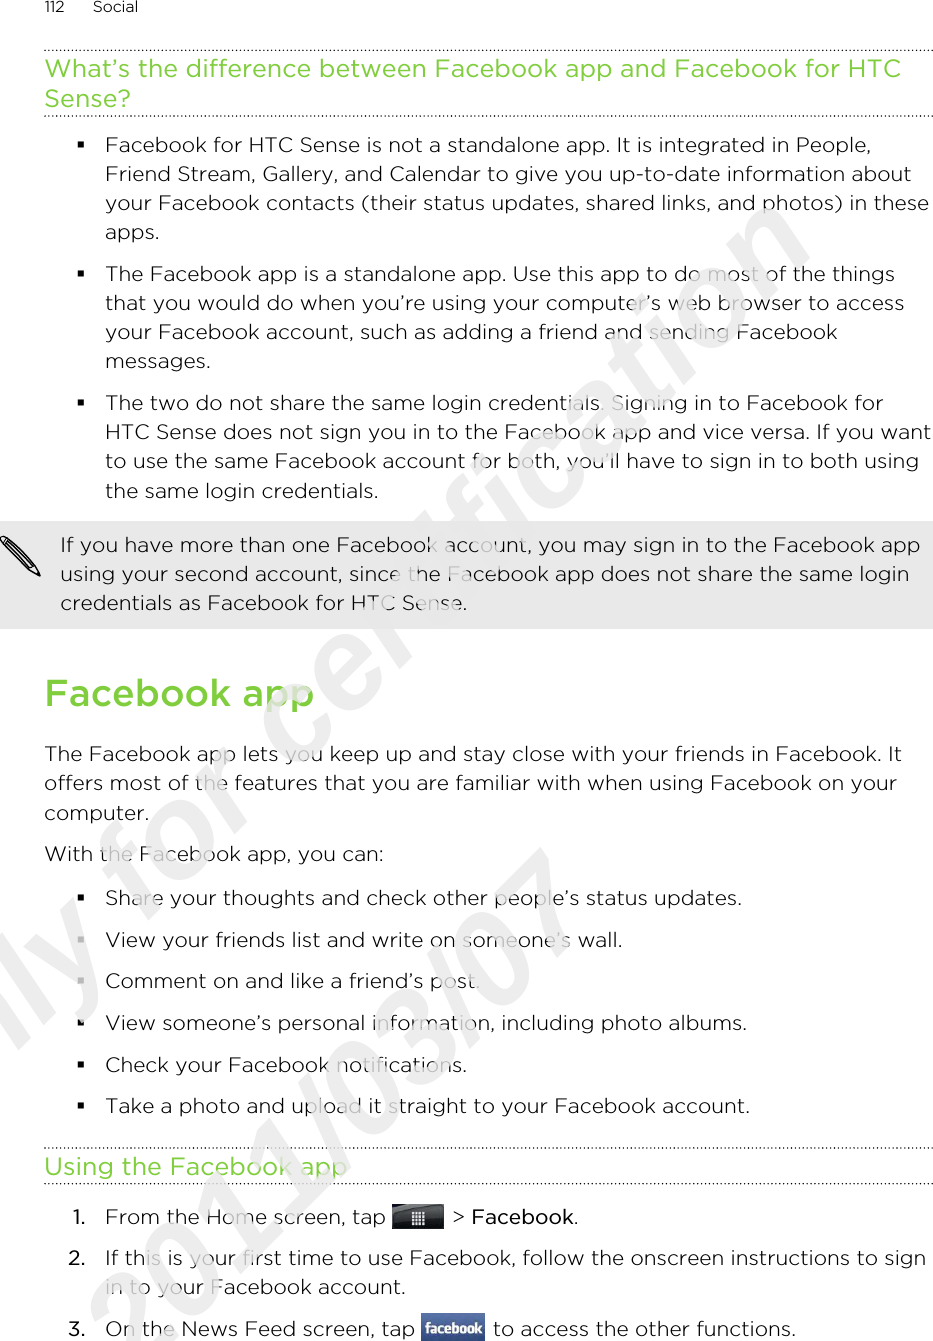 What’s the difference between Facebook app and Facebook for HTCSense?§Facebook for HTC Sense is not a standalone app. It is integrated in People,Friend Stream, Gallery, and Calendar to give you up-to-date information aboutyour Facebook contacts (their status updates, shared links, and photos) in theseapps.§The Facebook app is a standalone app. Use this app to do most of the thingsthat you would do when you’re using your computer’s web browser to accessyour Facebook account, such as adding a friend and sending Facebookmessages.§The two do not share the same login credentials. Signing in to Facebook forHTC Sense does not sign you in to the Facebook app and vice versa. If you wantto use the same Facebook account for both, you’ll have to sign in to both usingthe same login credentials.If you have more than one Facebook account, you may sign in to the Facebook appusing your second account, since the Facebook app does not share the same logincredentials as Facebook for HTC Sense.Facebook appThe Facebook app lets you keep up and stay close with your friends in Facebook. Itoffers most of the features that you are familiar with when using Facebook on yourcomputer.With the Facebook app, you can:§Share your thoughts and check other people’s status updates.§View your friends list and write on someone’s wall.§Comment on and like a friend’s post.§View someone’s personal information, including photo albums.§Check your Facebook notifications.§Take a photo and upload it straight to your Facebook account.Using the Facebook app1. From the Home screen, tap   &gt; Facebook.2. If this is your first time to use Facebook, follow the onscreen instructions to signin to your Facebook account.3. On the News Feed screen, tap   to access the other functions.112 SocialOnly for certification  2011/03/07